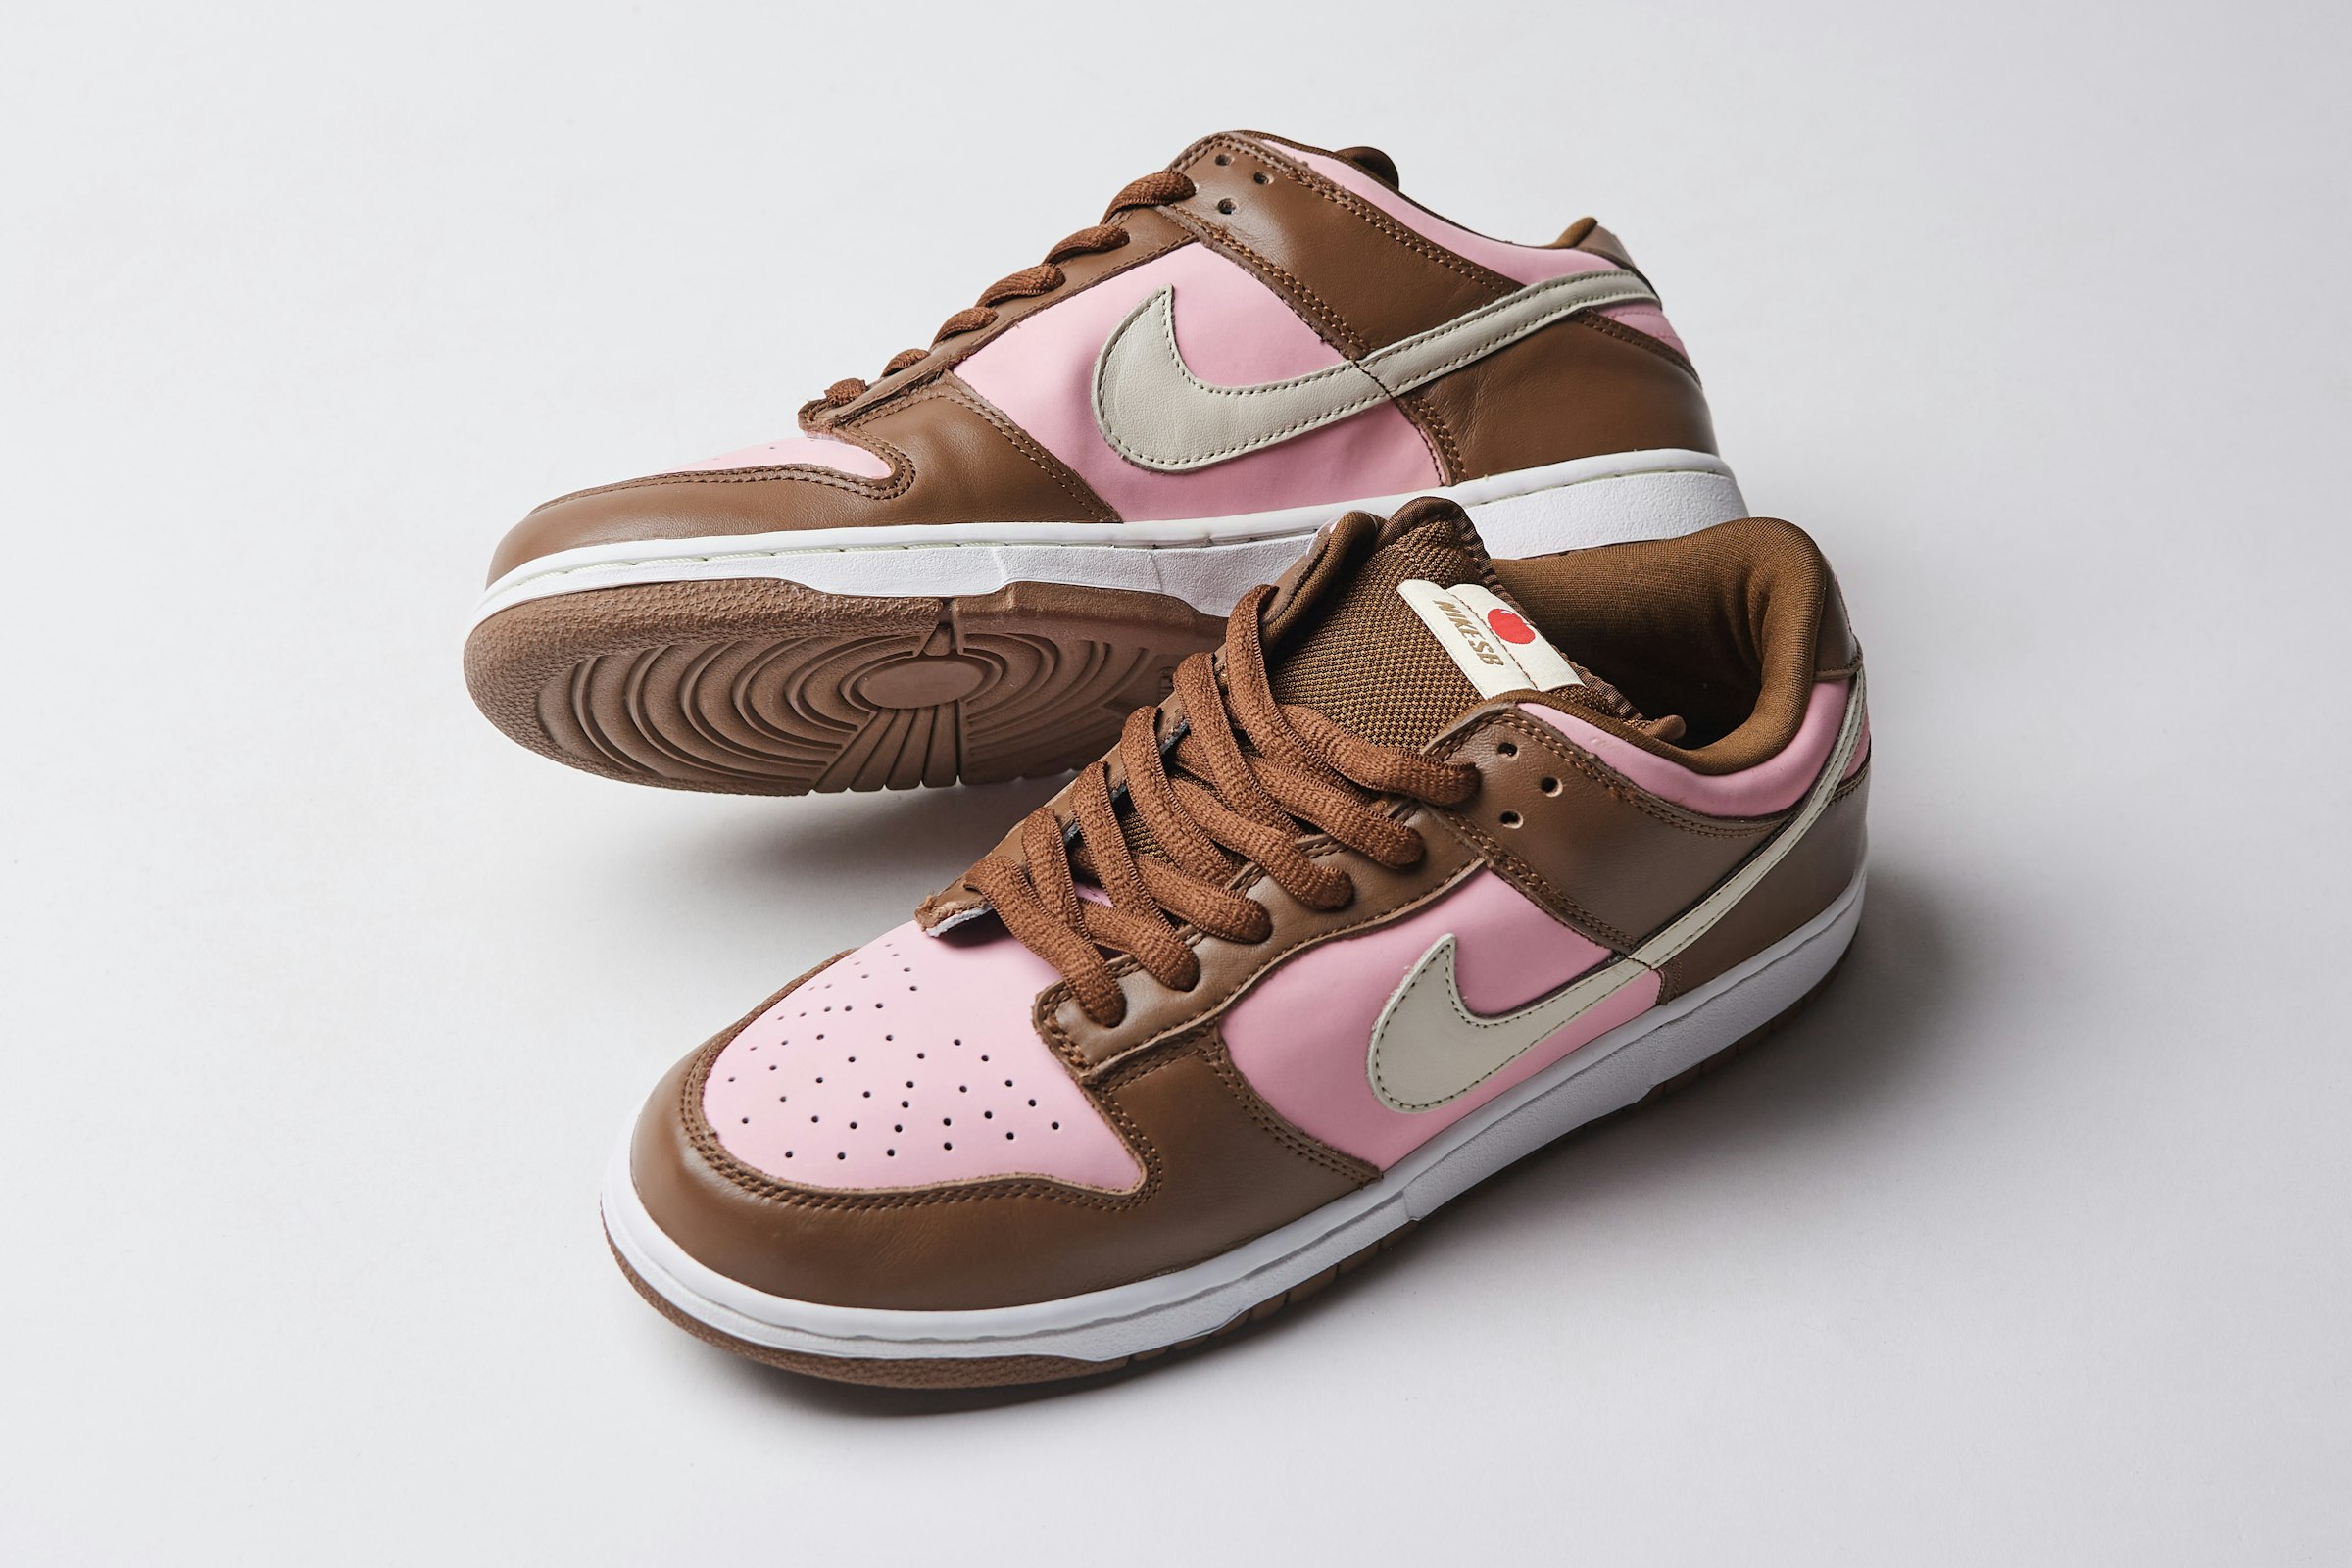 The first collaboration model between the apparel brand 'STUSSY' and 'NIKE SB'. This design, created by Stussy's brand manager Robby Jeffers, featured a cherry on the shoe tongue – a nod to his favorite dessert, hence the nickname 'Cherry DUNK'